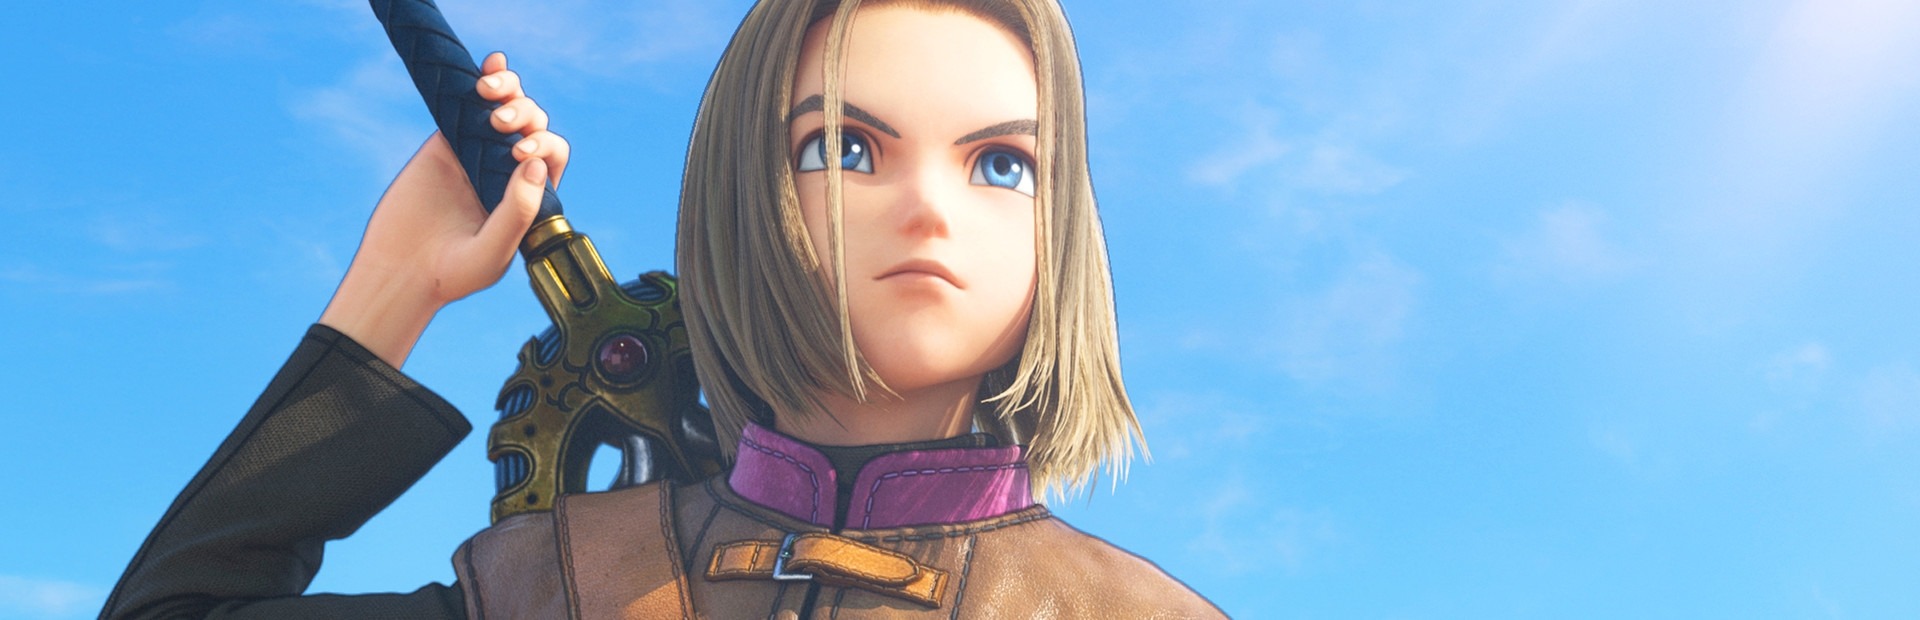 Dragon Quest XI S: Echoes of an Elusive Age- Definitive Edition